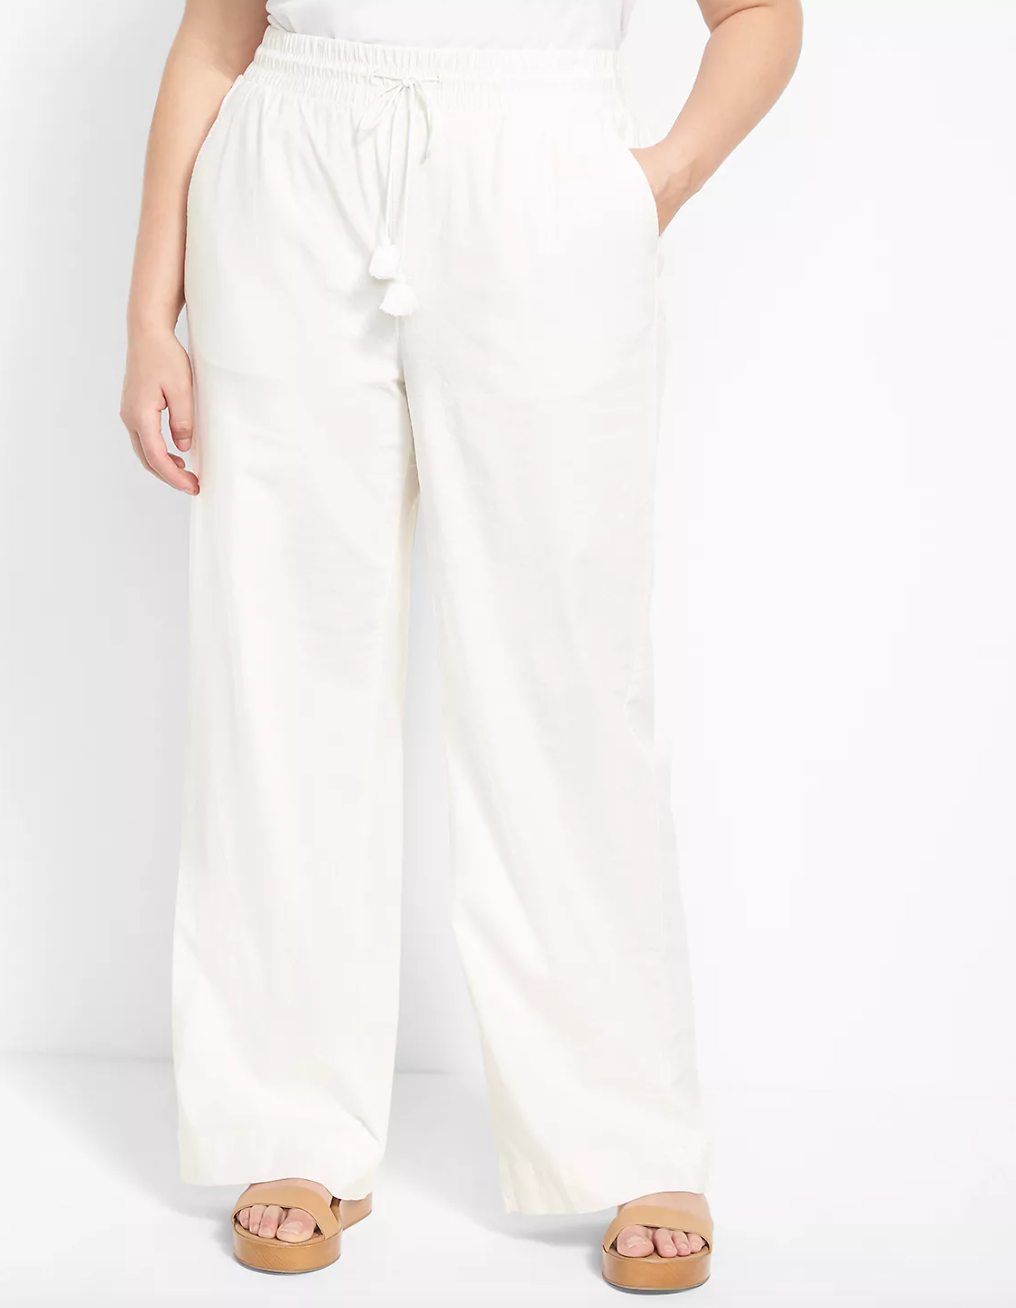 Model is wearing white linen pants and tan platform sandals